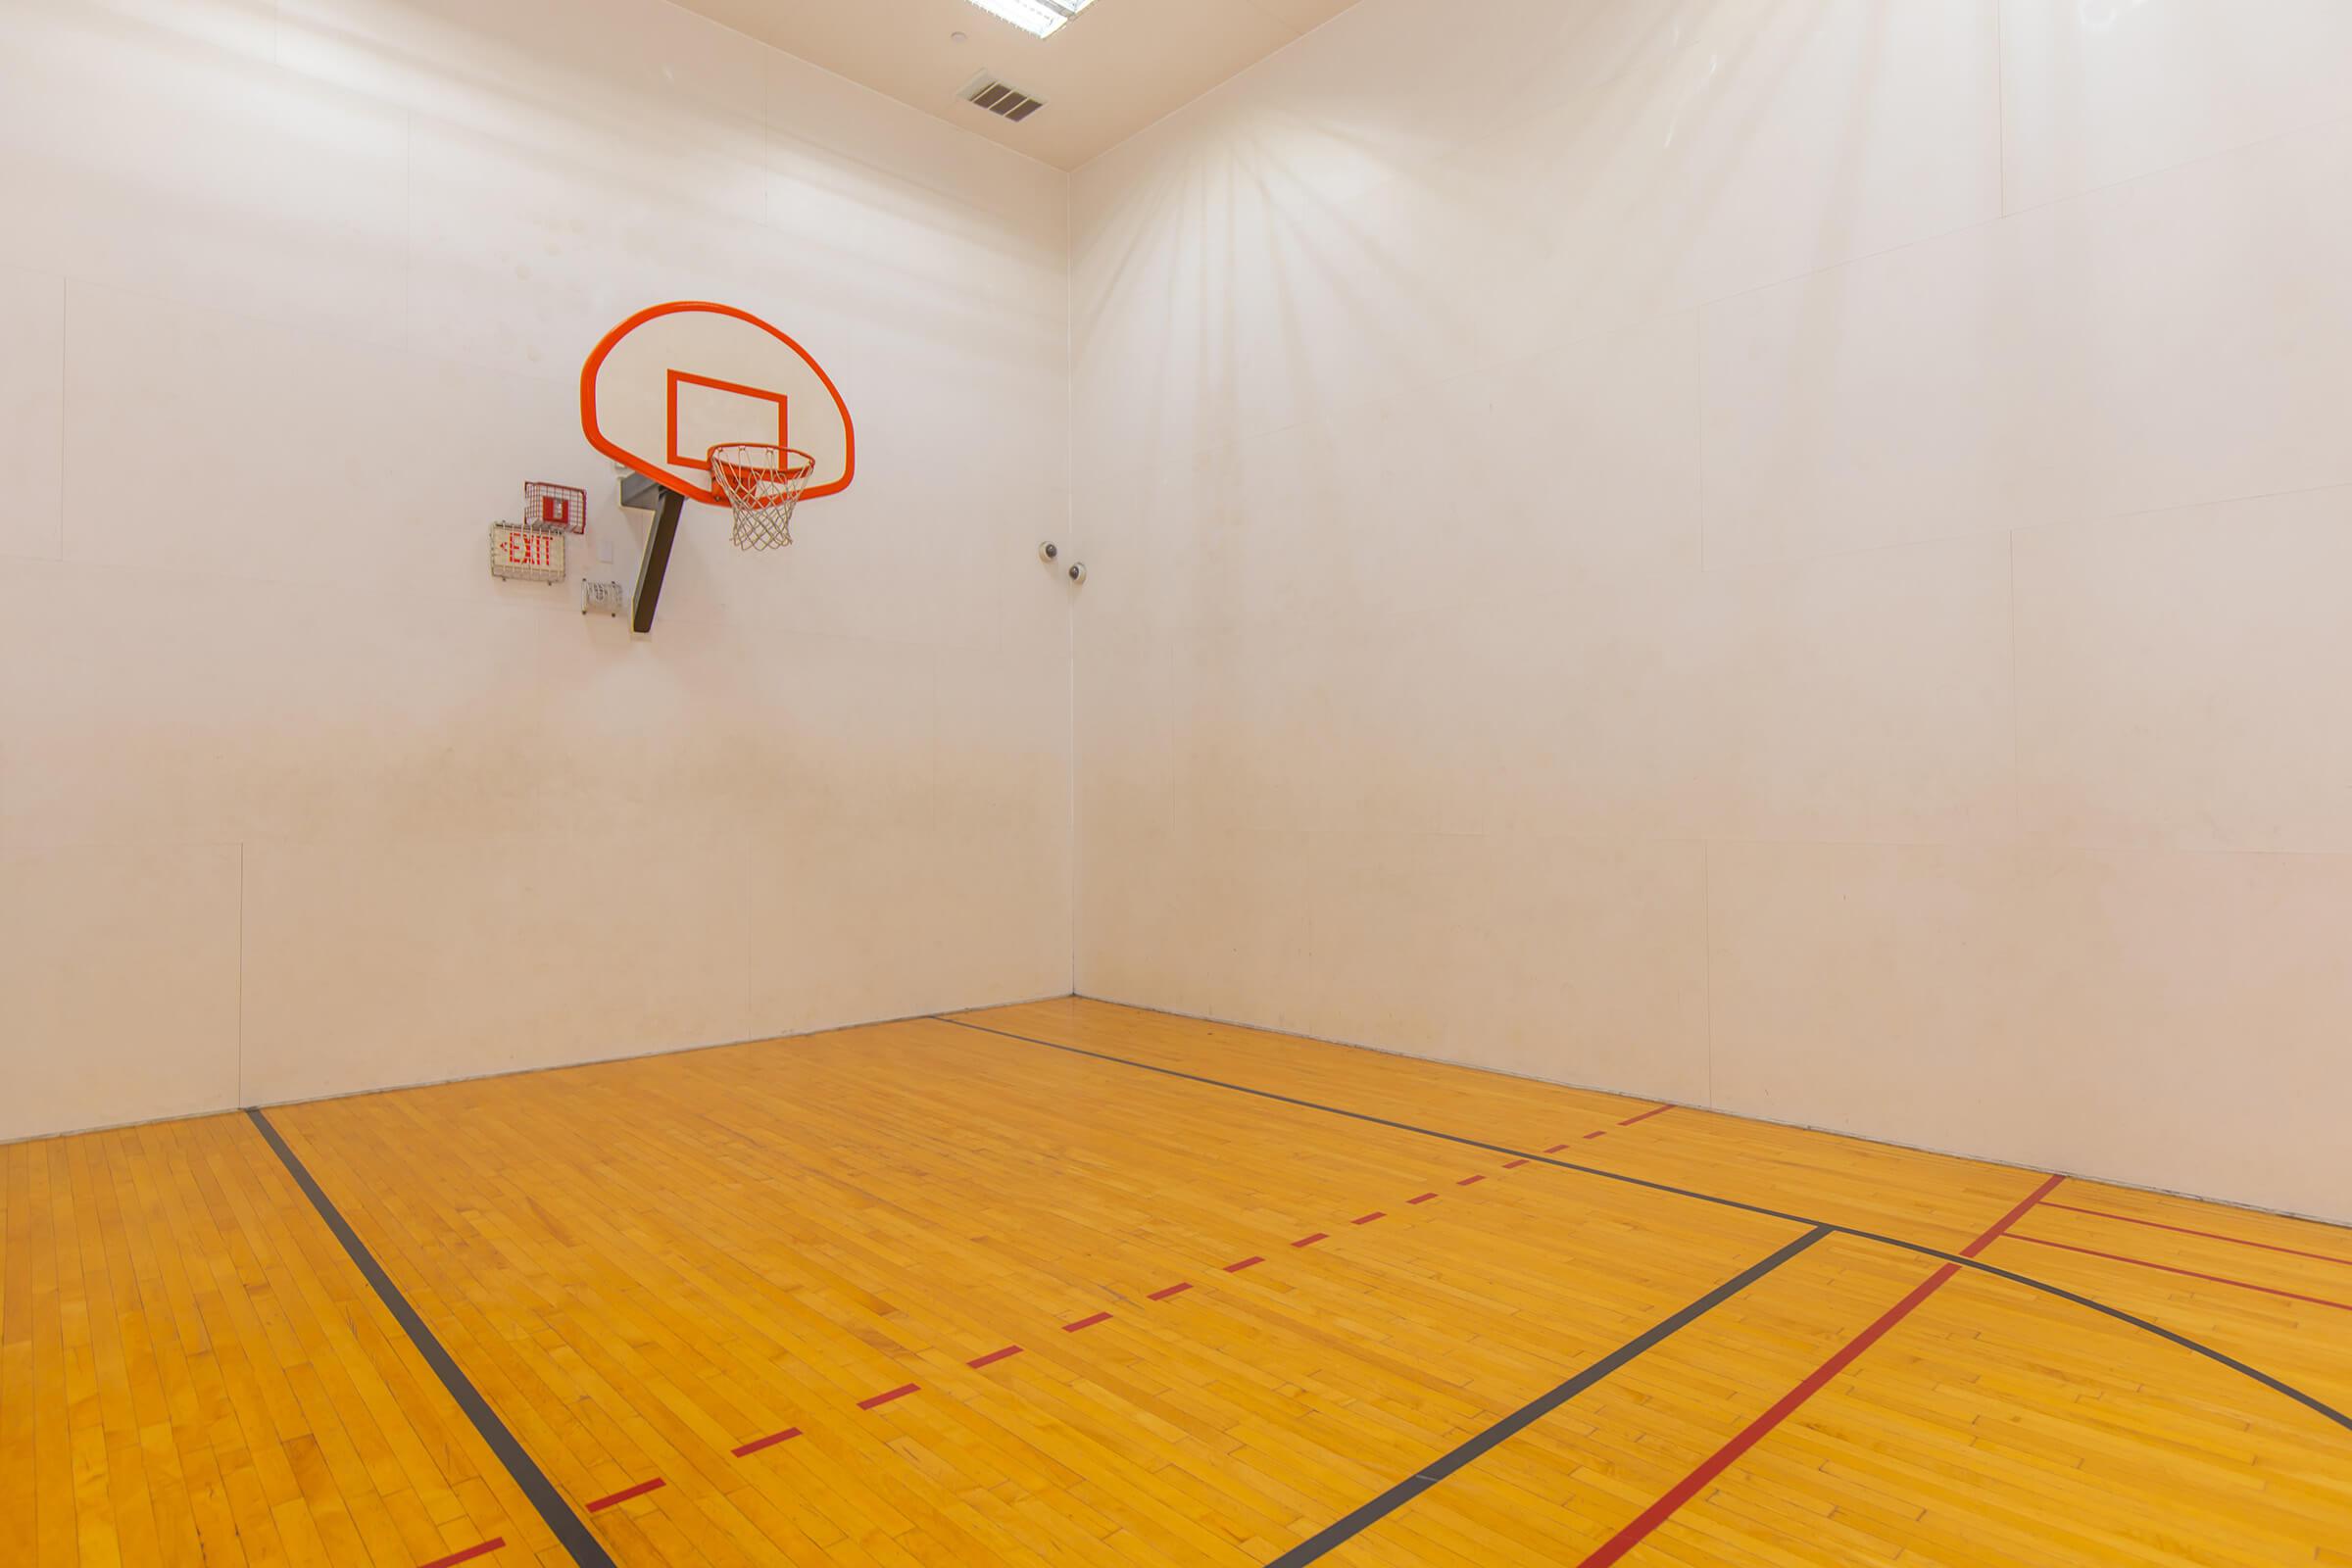 a close up of a racquetball in a room